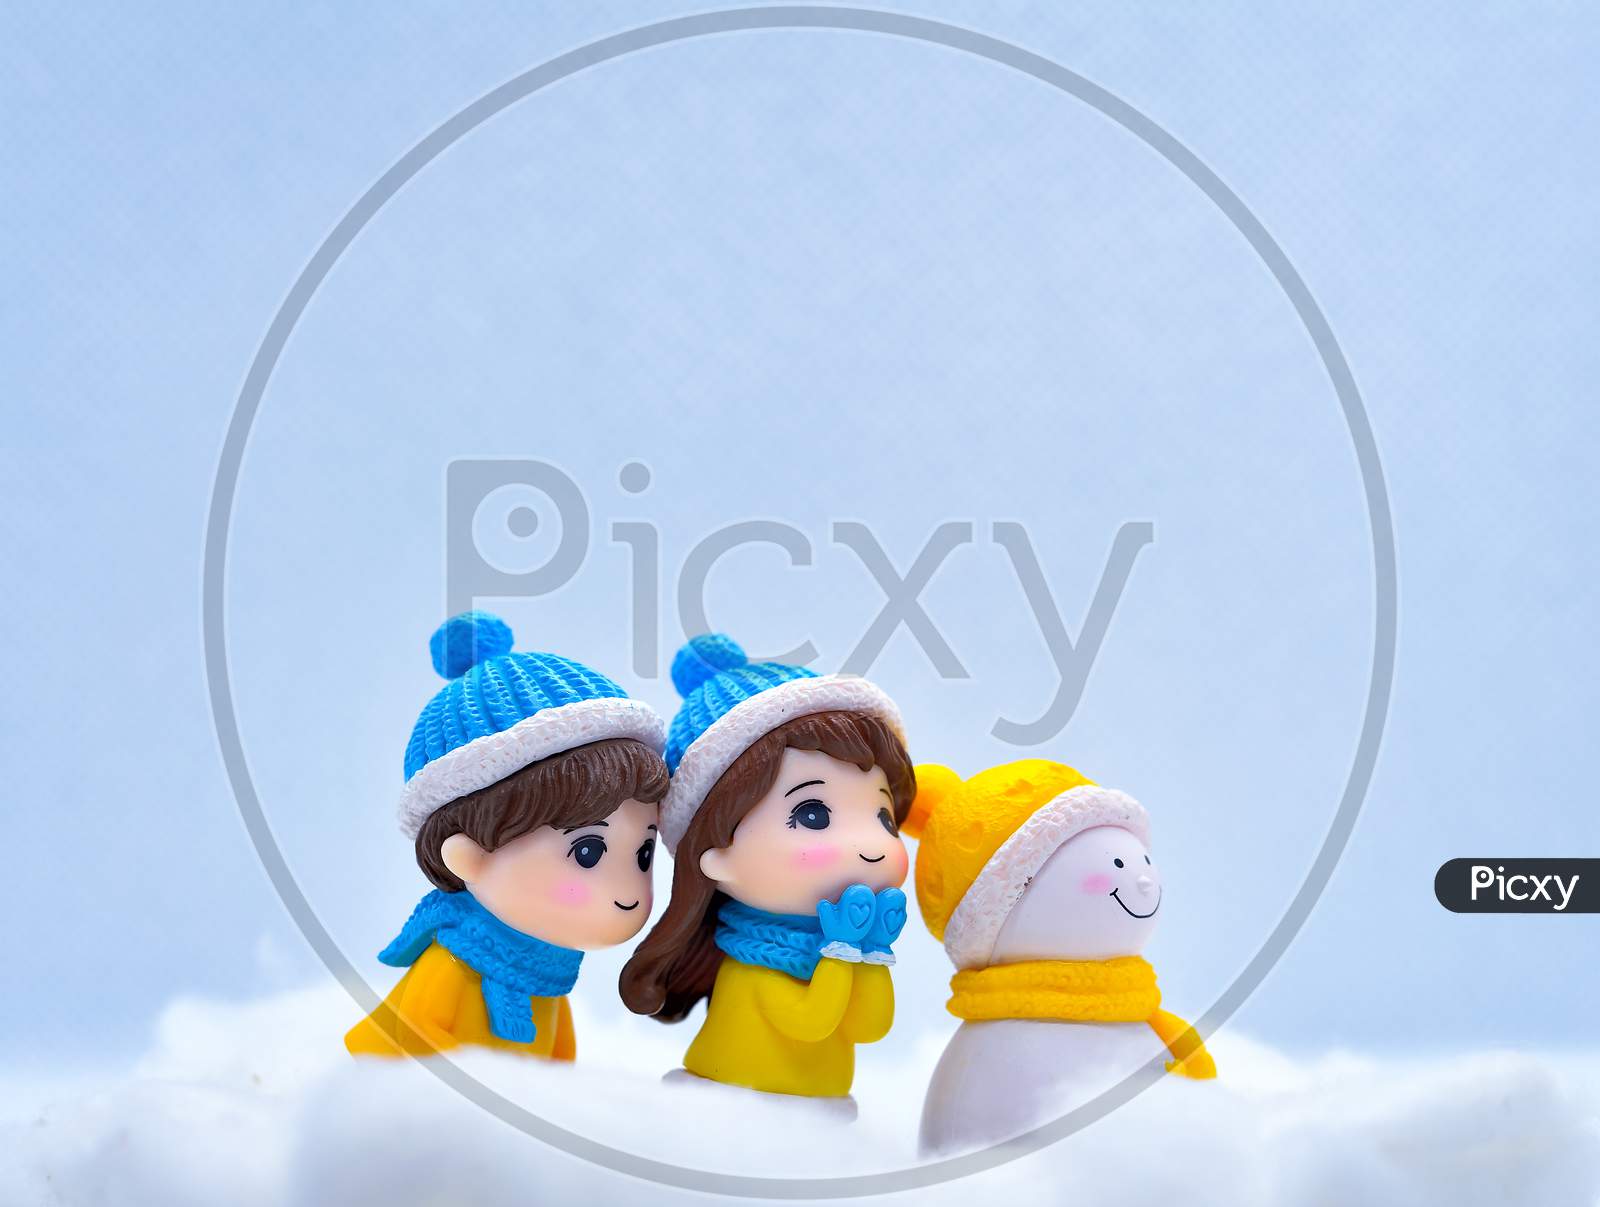 Tourism And Travel Concept: Miniature People Looking For Something In Winter Snow Along With Little Snowman